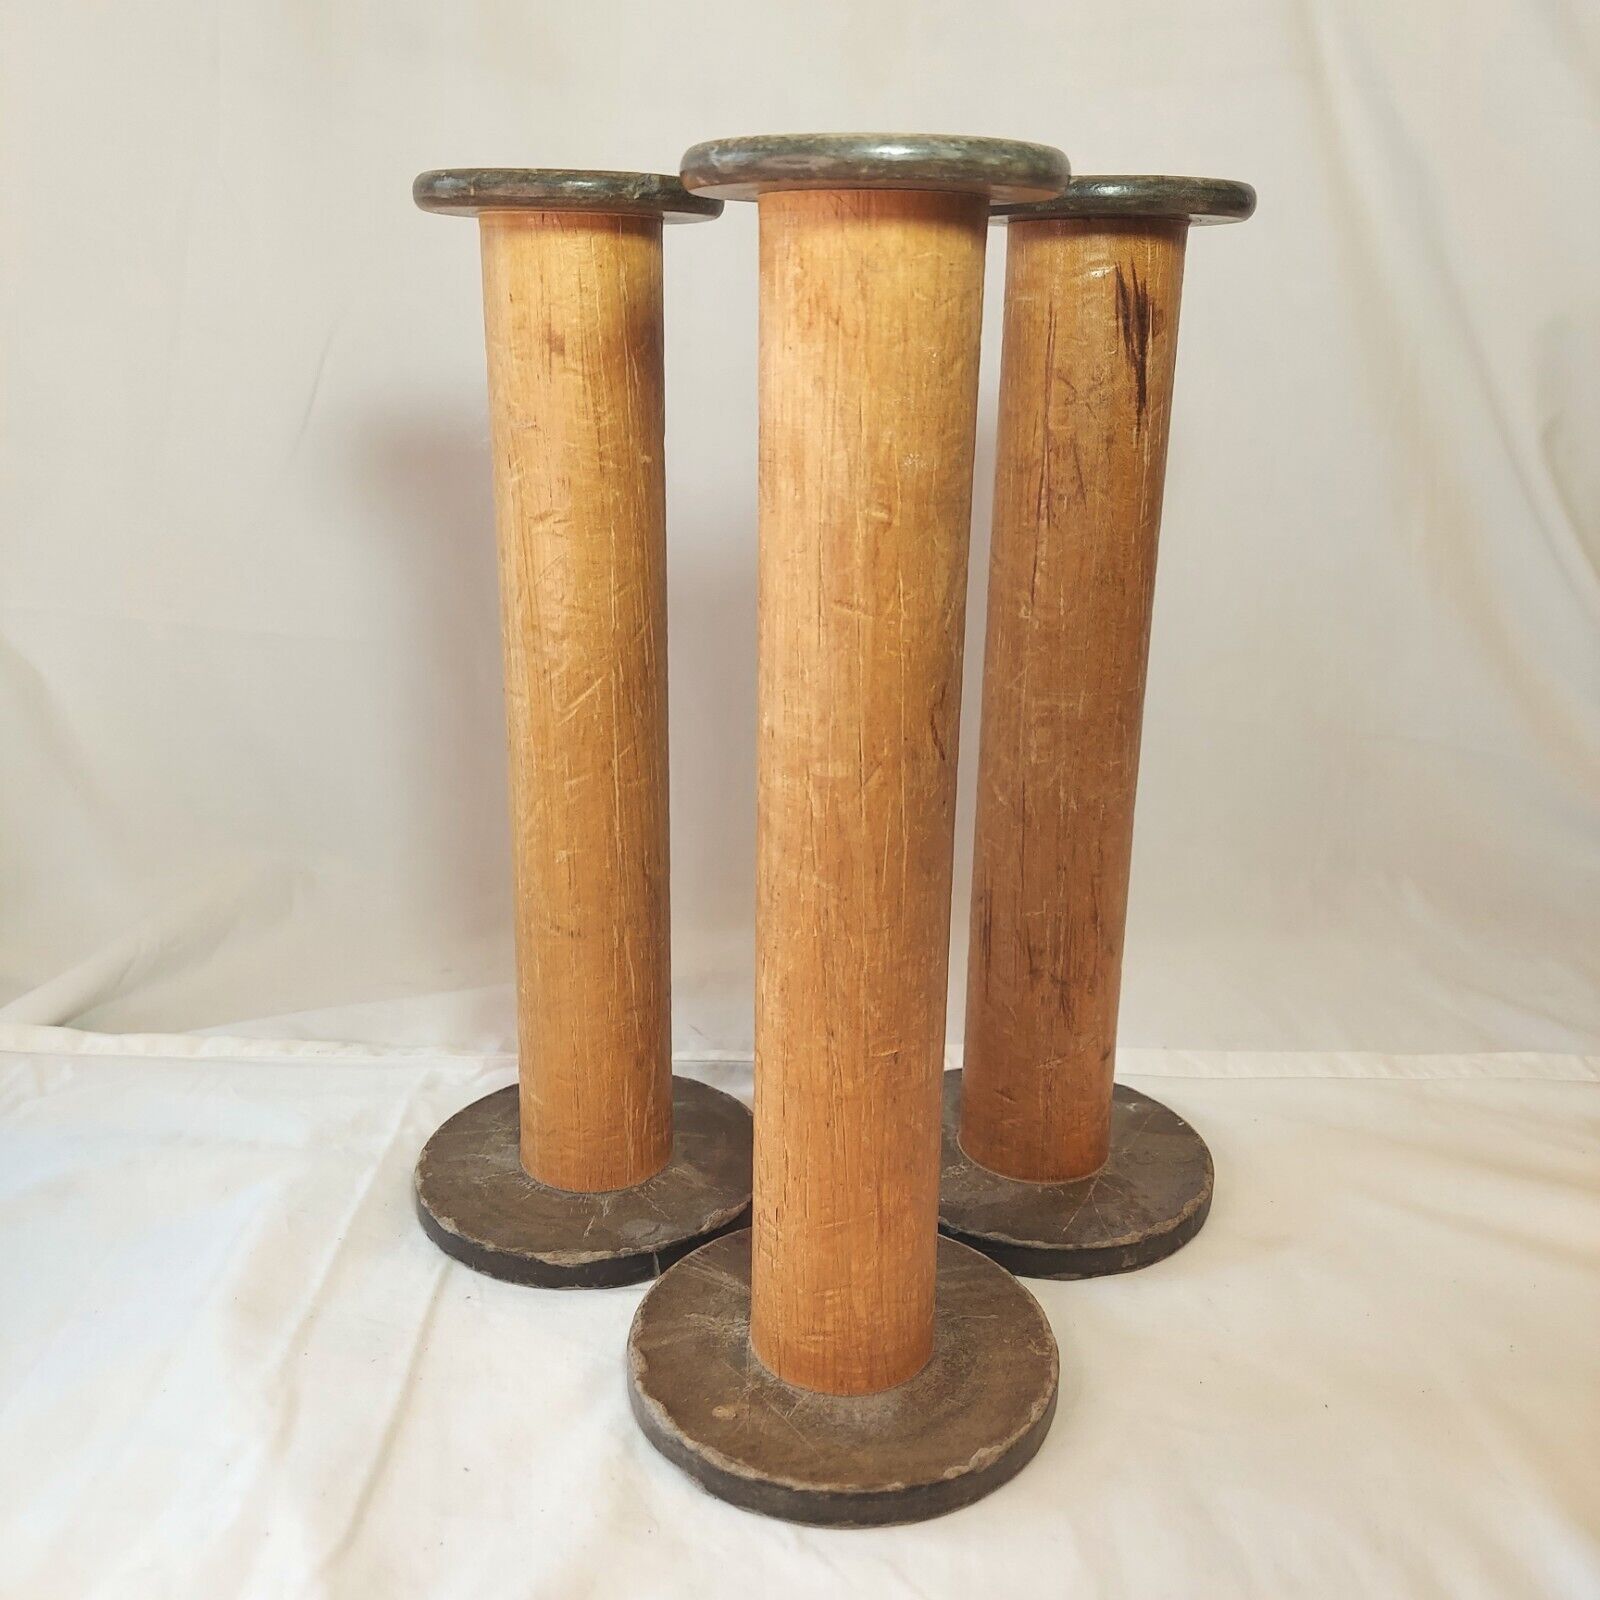 3 Large Spools Ind. Textiles 13” Tall 4 7/8\